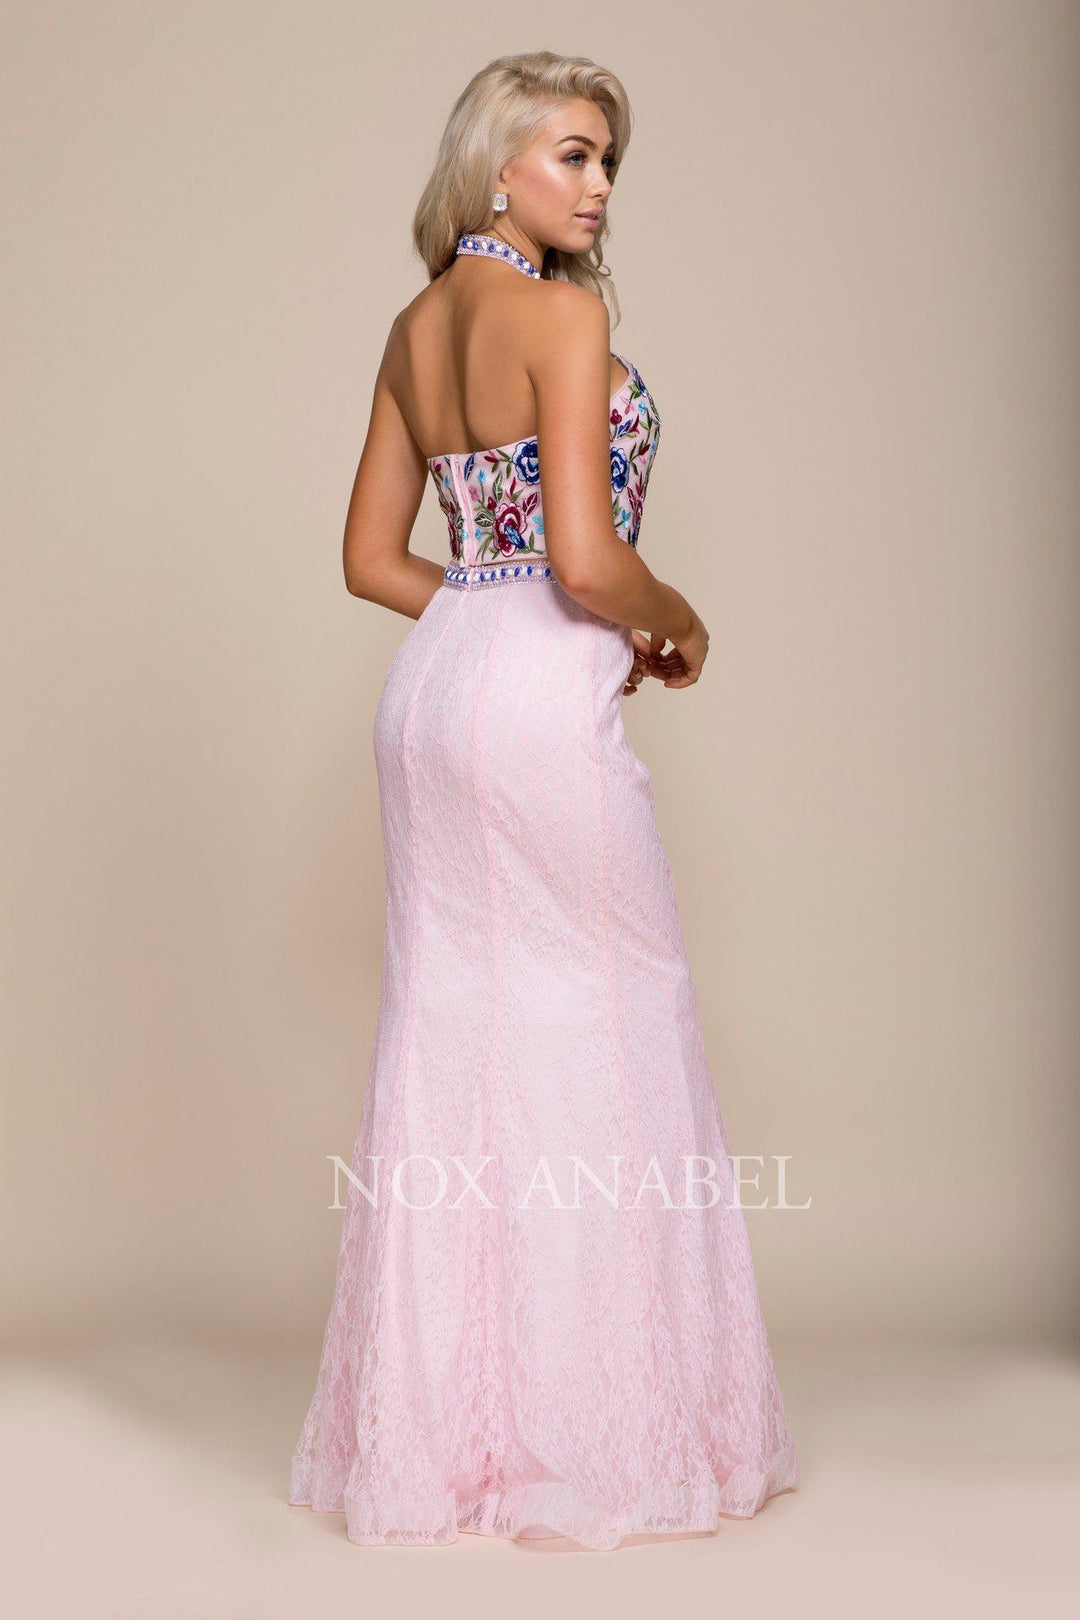 Long Two-Piece Dress with Floral Embroidery by Nox Anabel 8262-Long Formal Dresses-ABC Fashion